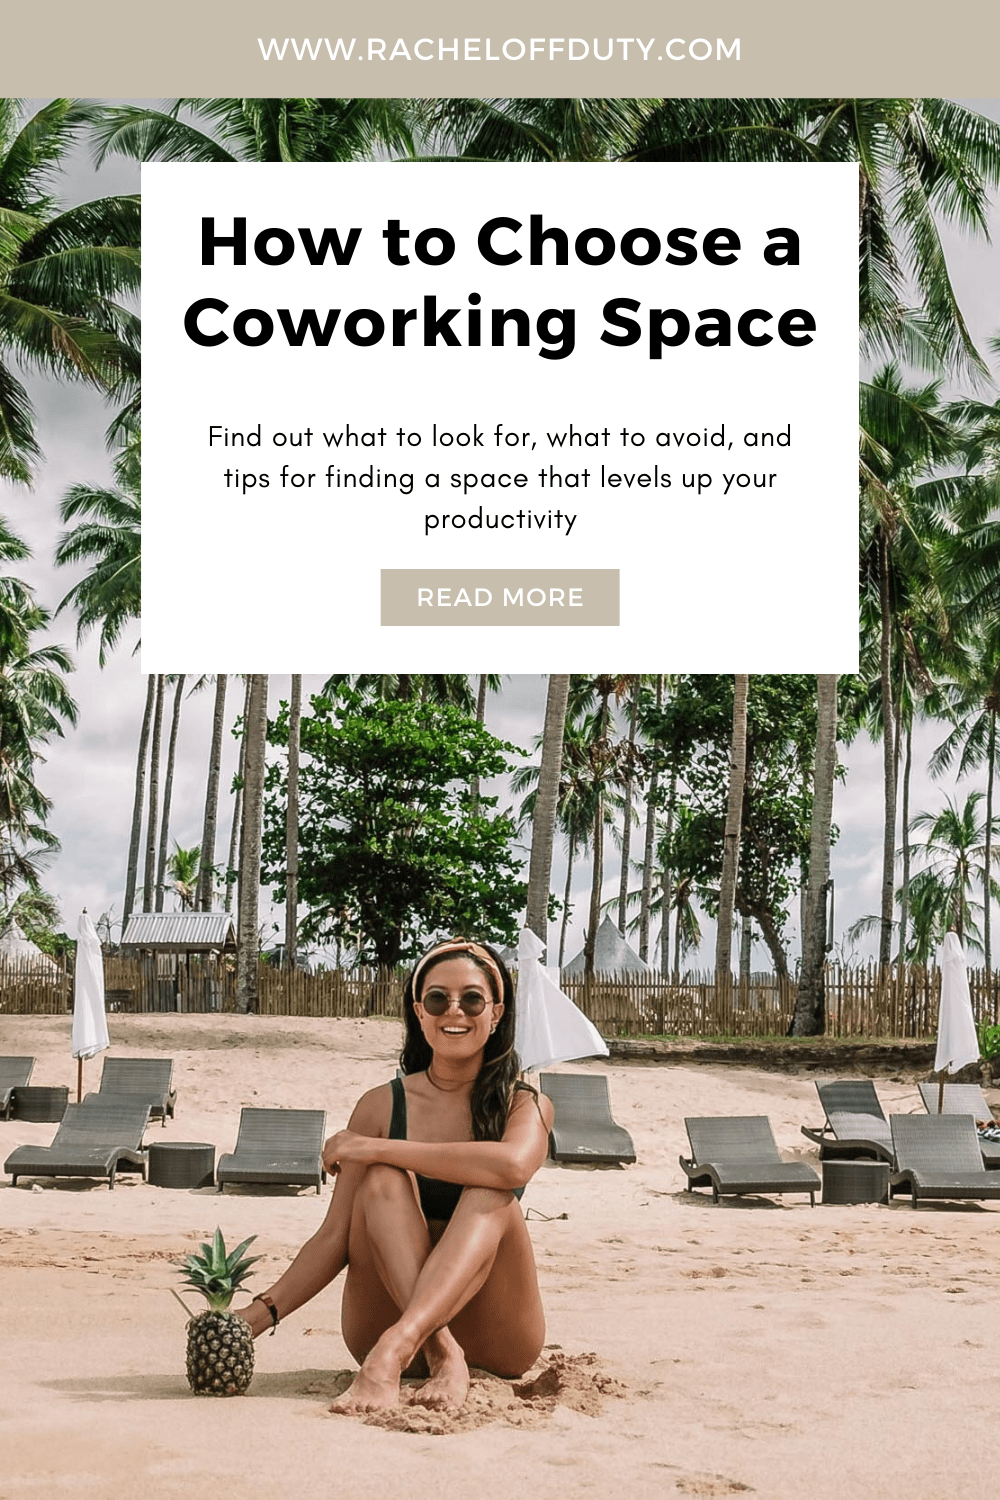 How to find a coworking space you'll love - Rachel Off Duty